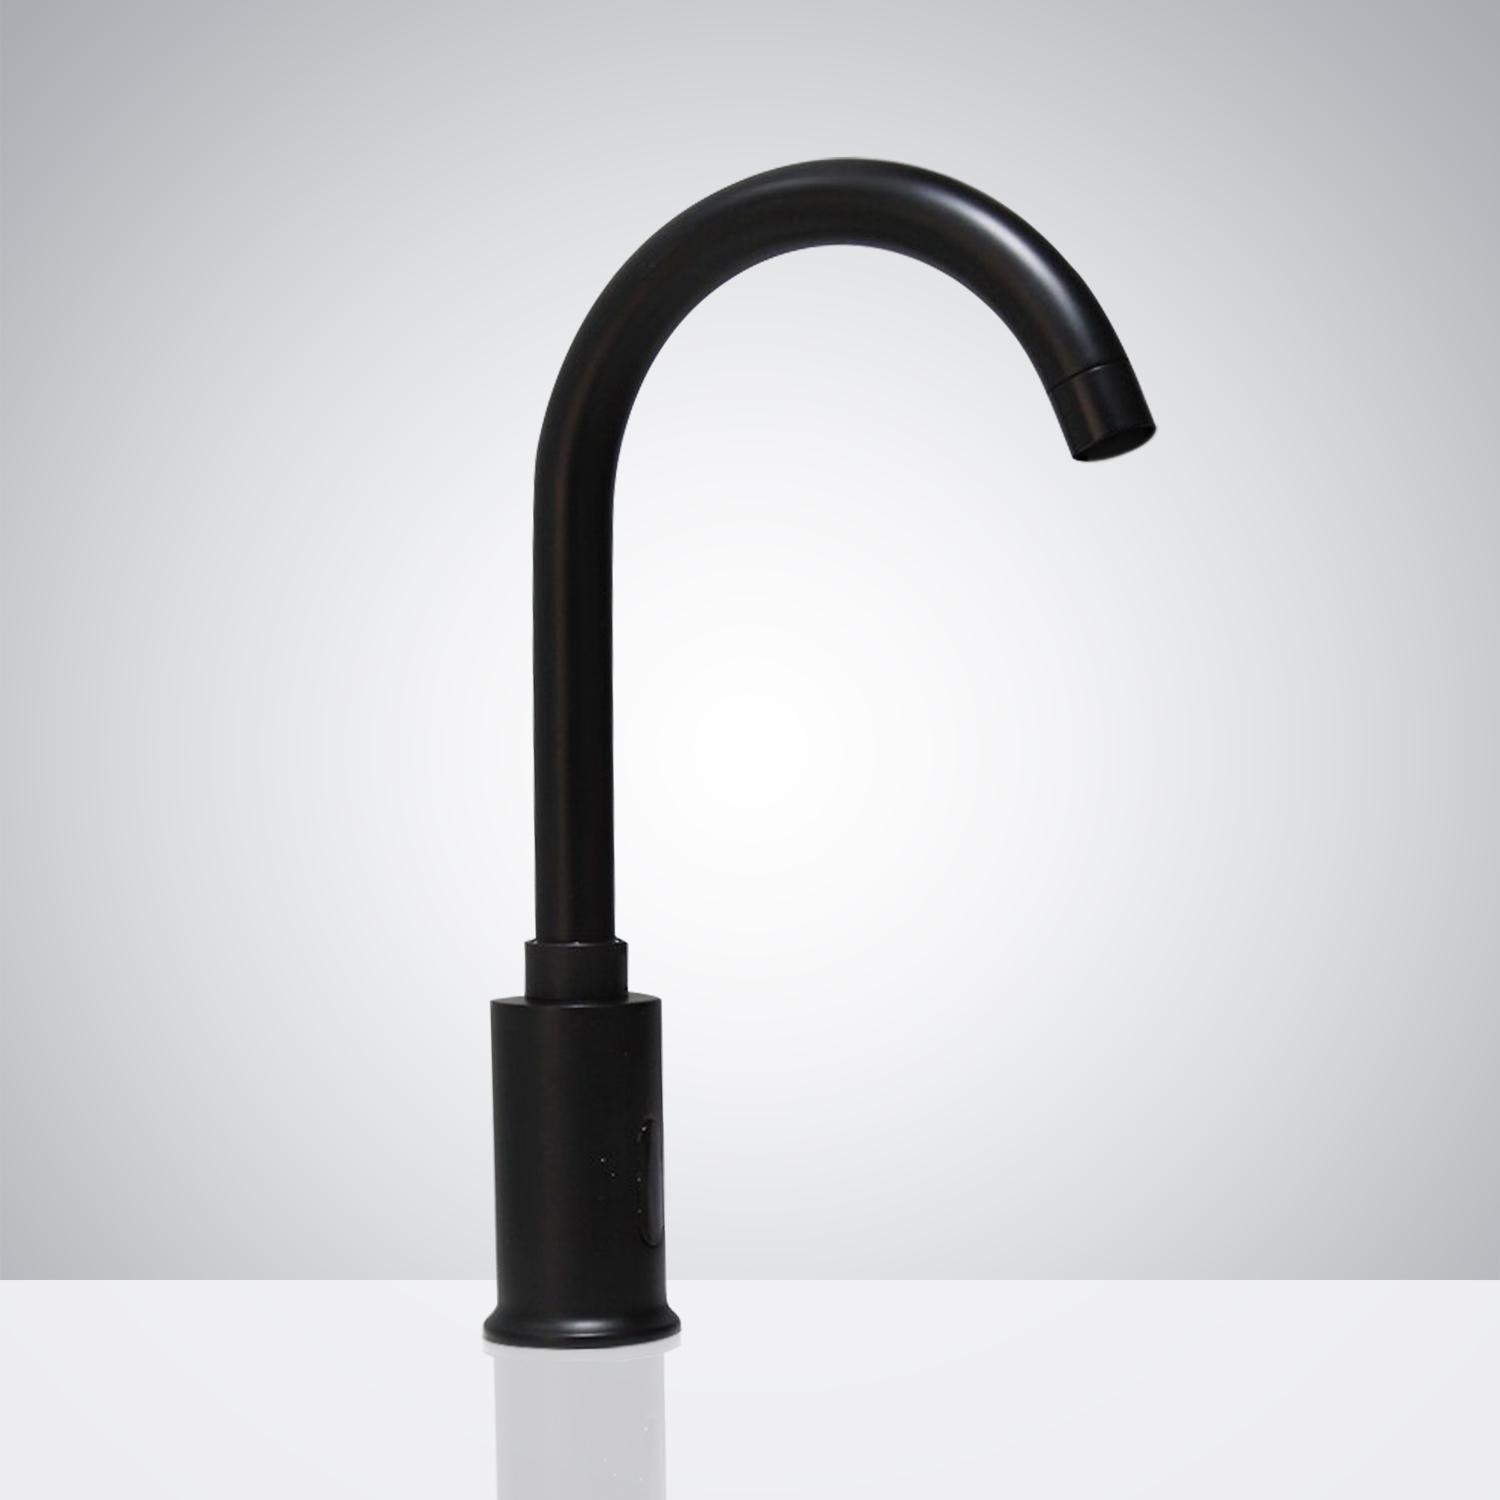 Fontana Thermostatic Commercial Automatic Motion Sensor Faucet Solid Brass Construction in Matte Black